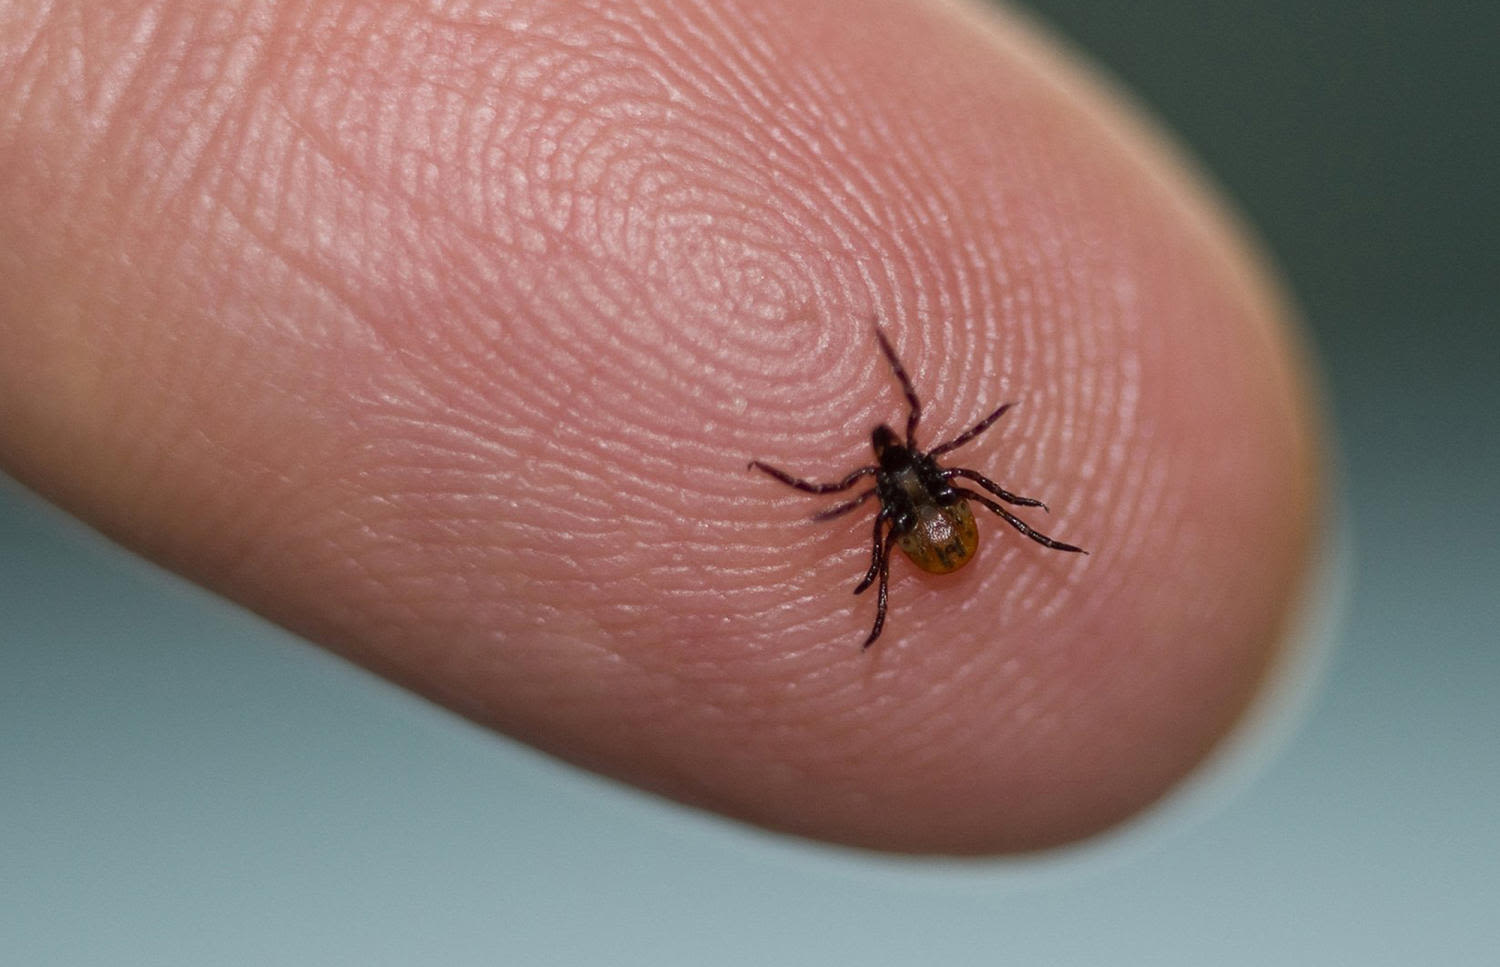 Most tick bites go unnoticed. Here's how to identify and treat them